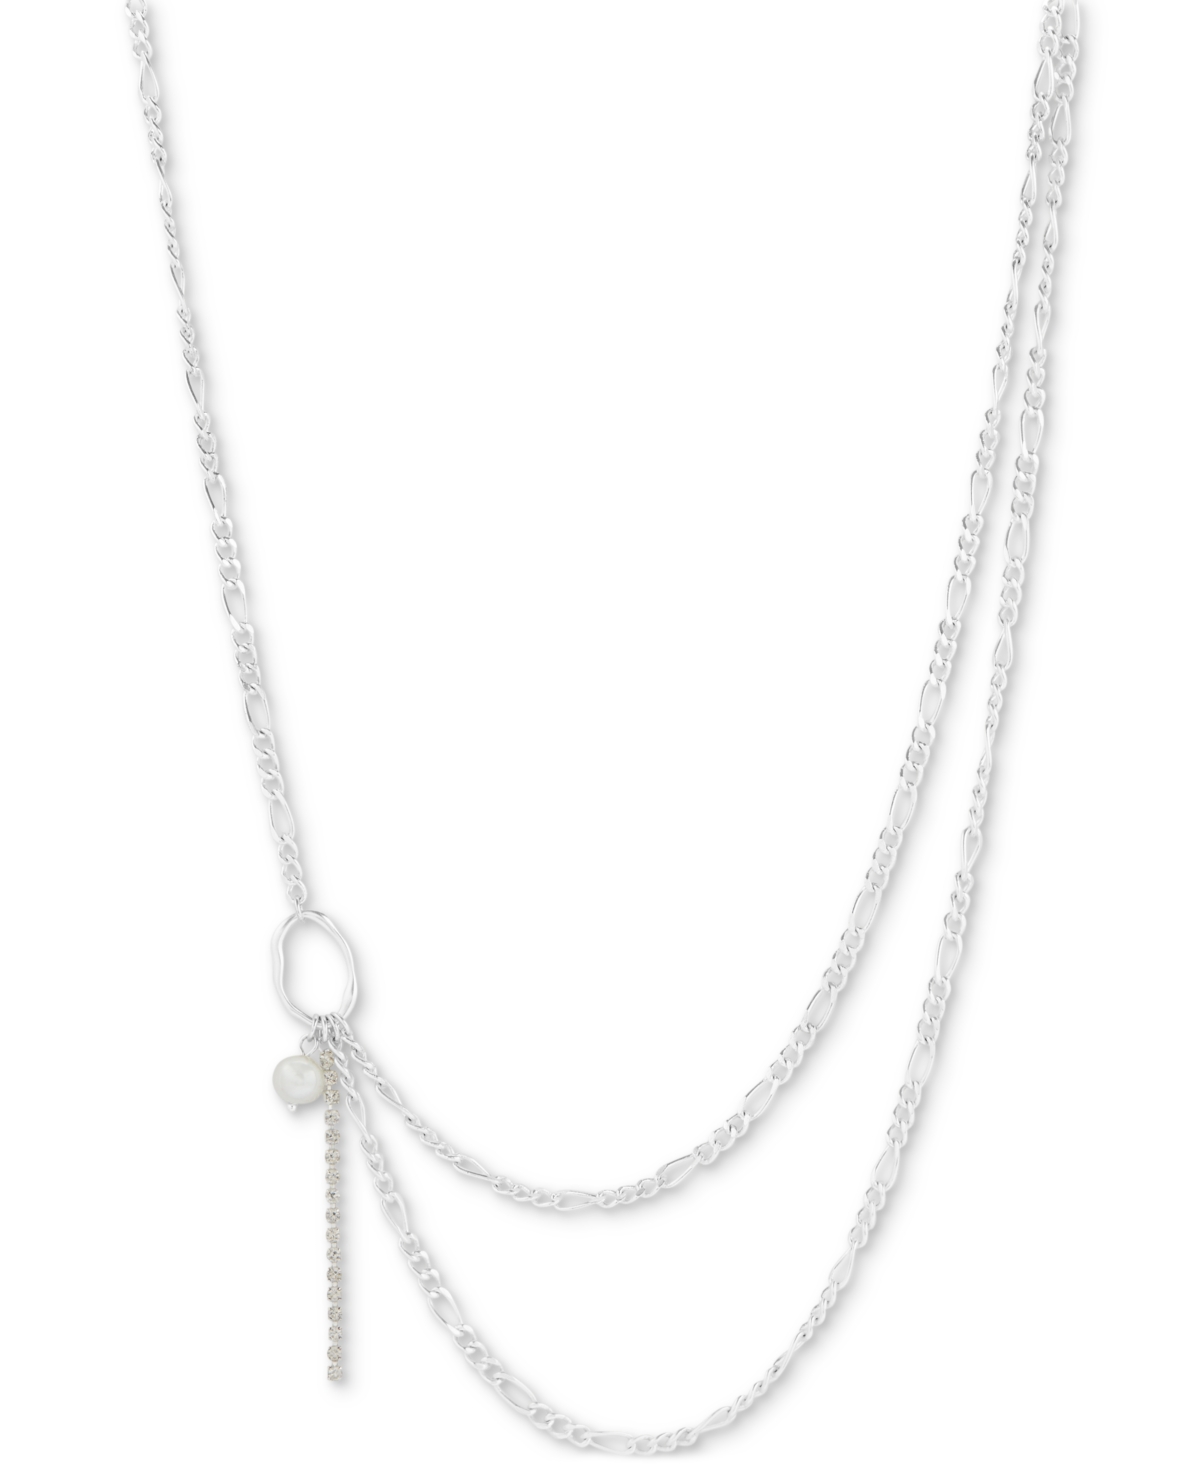 Lucky Brand Silver-tone Crystal Chain & Imitation Pearl Asymmetrical Statement Necklace, 17" + 2" Extender